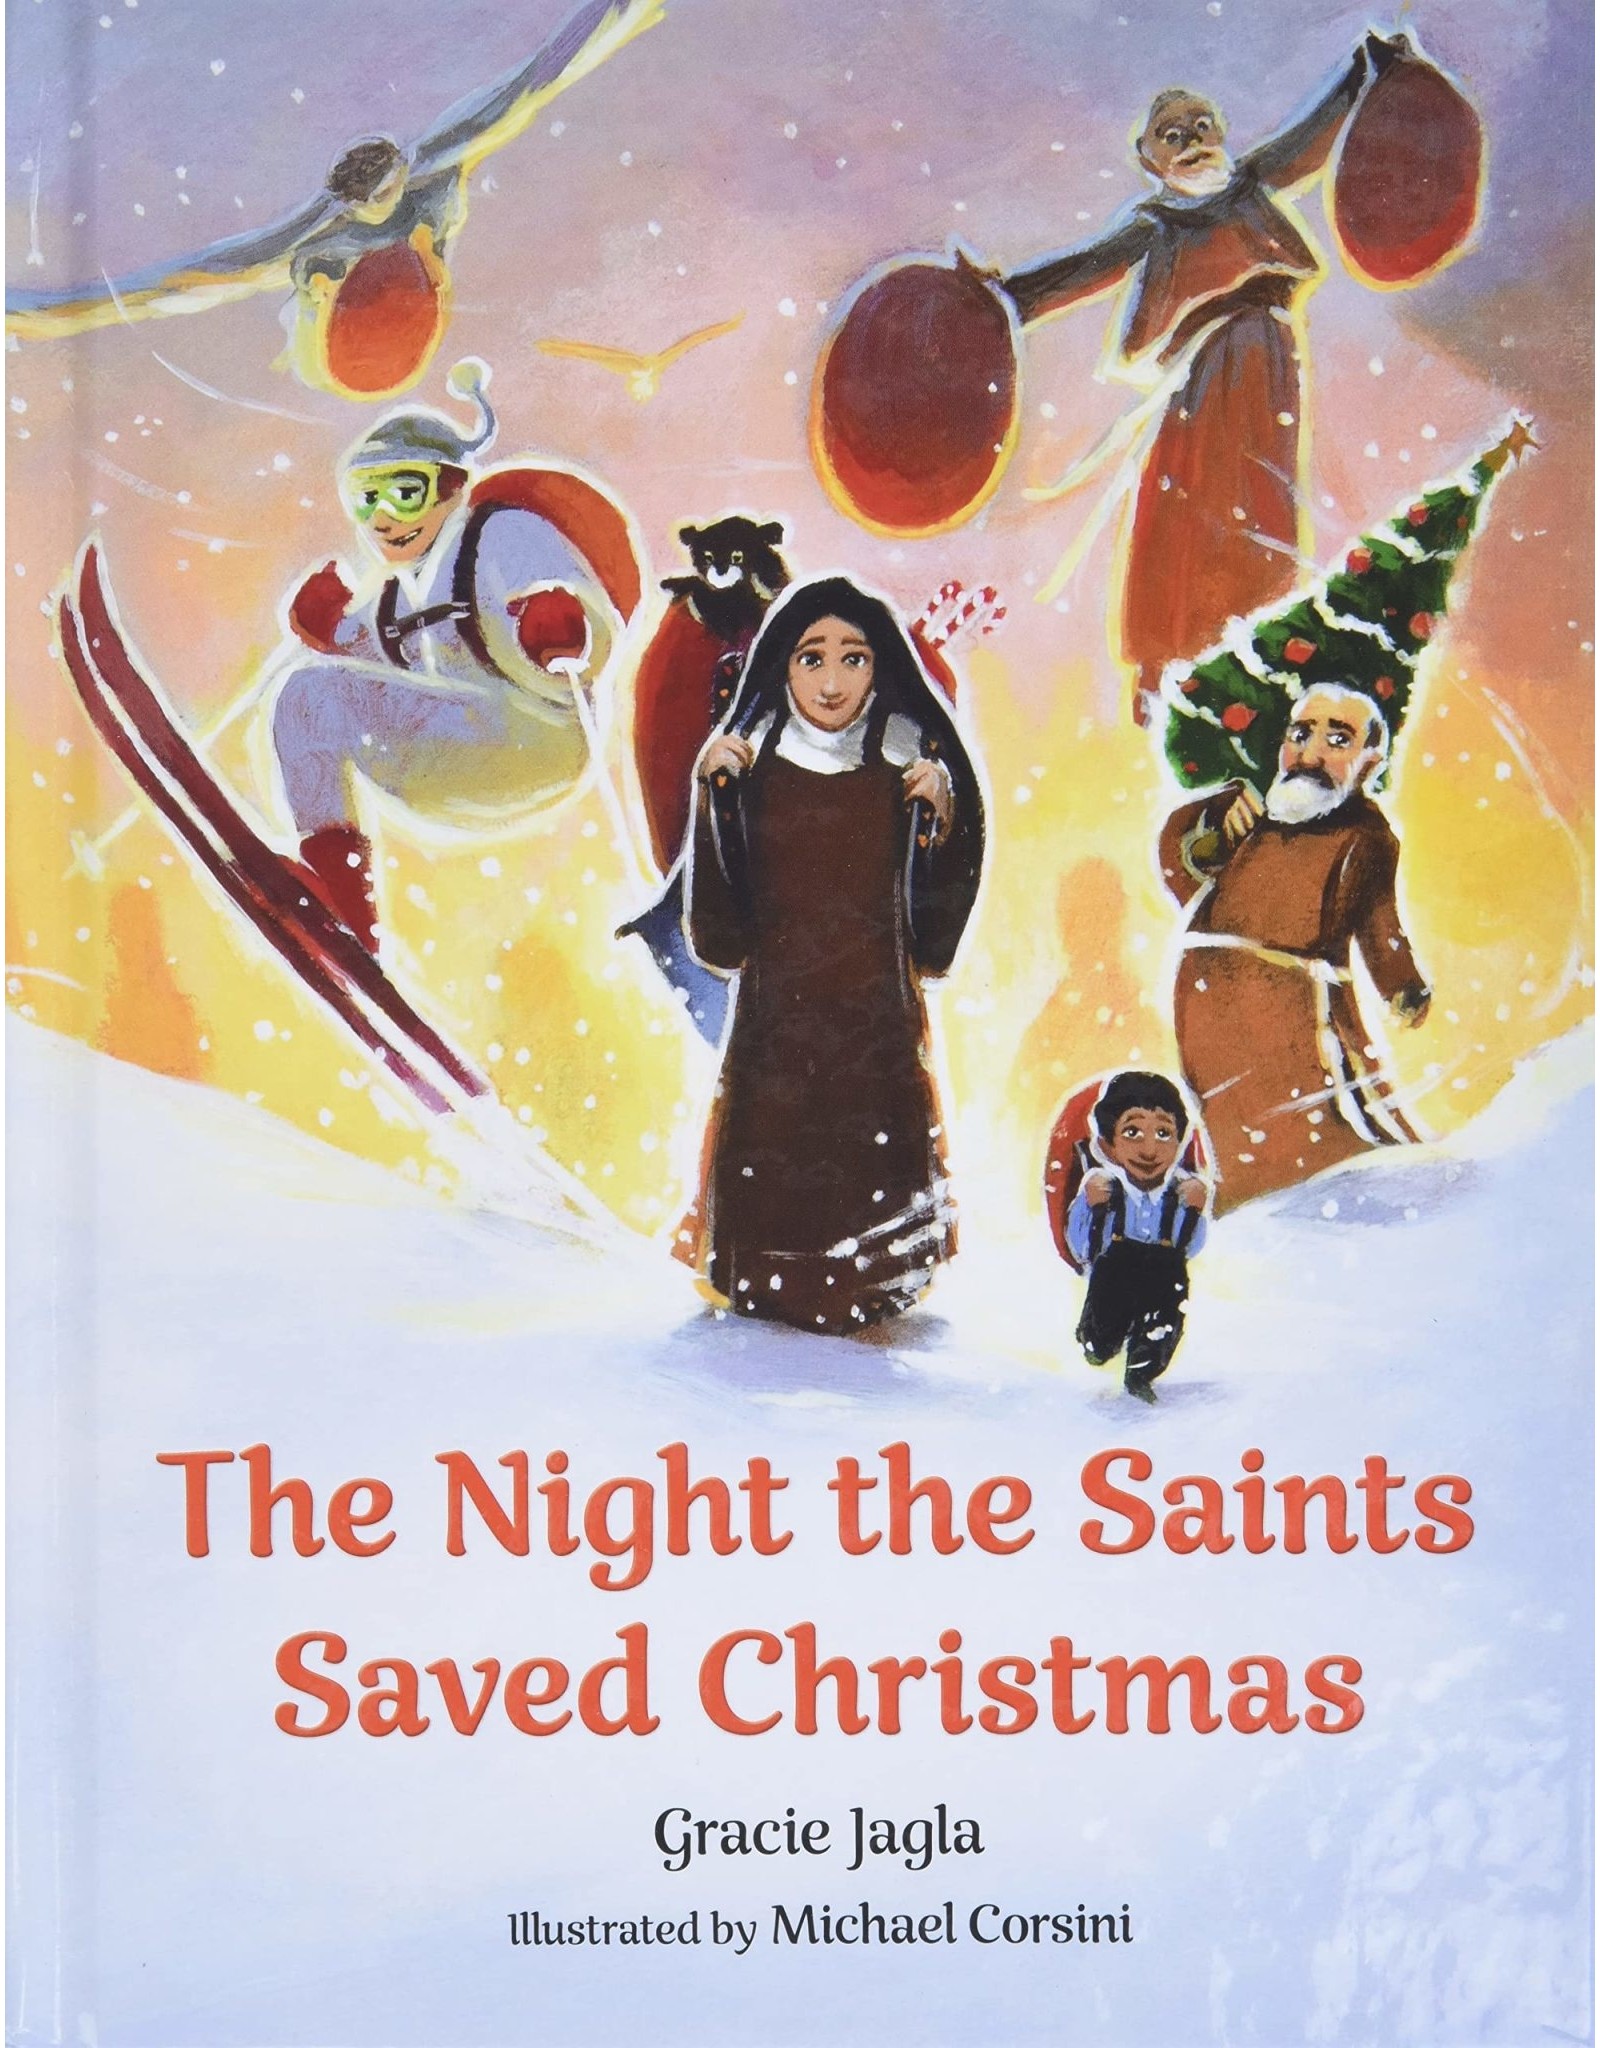 OSV (Our Sunday Visitor) The Night the Saints Saved Christmas